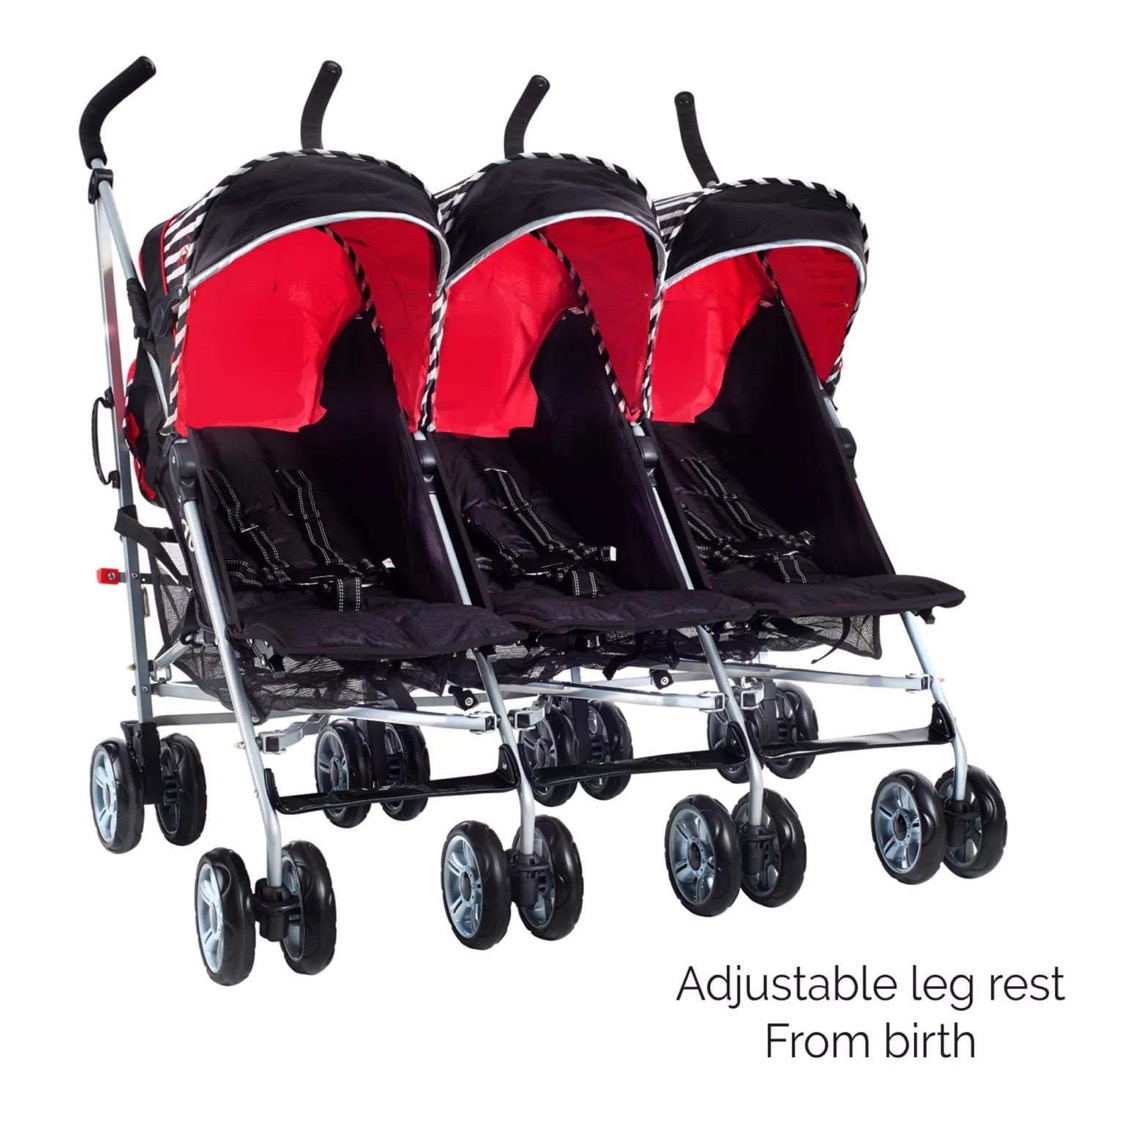 We have a family who need a triple buggy! Have you got one to donate?
Or could you buy one from our wishlist?
Please contact first in case we have been given one second hand. 
ow.ly/QWcK30s2OW7
#triplebuggy #extraordinaryrequest #supportingfamilies #canyouhelp